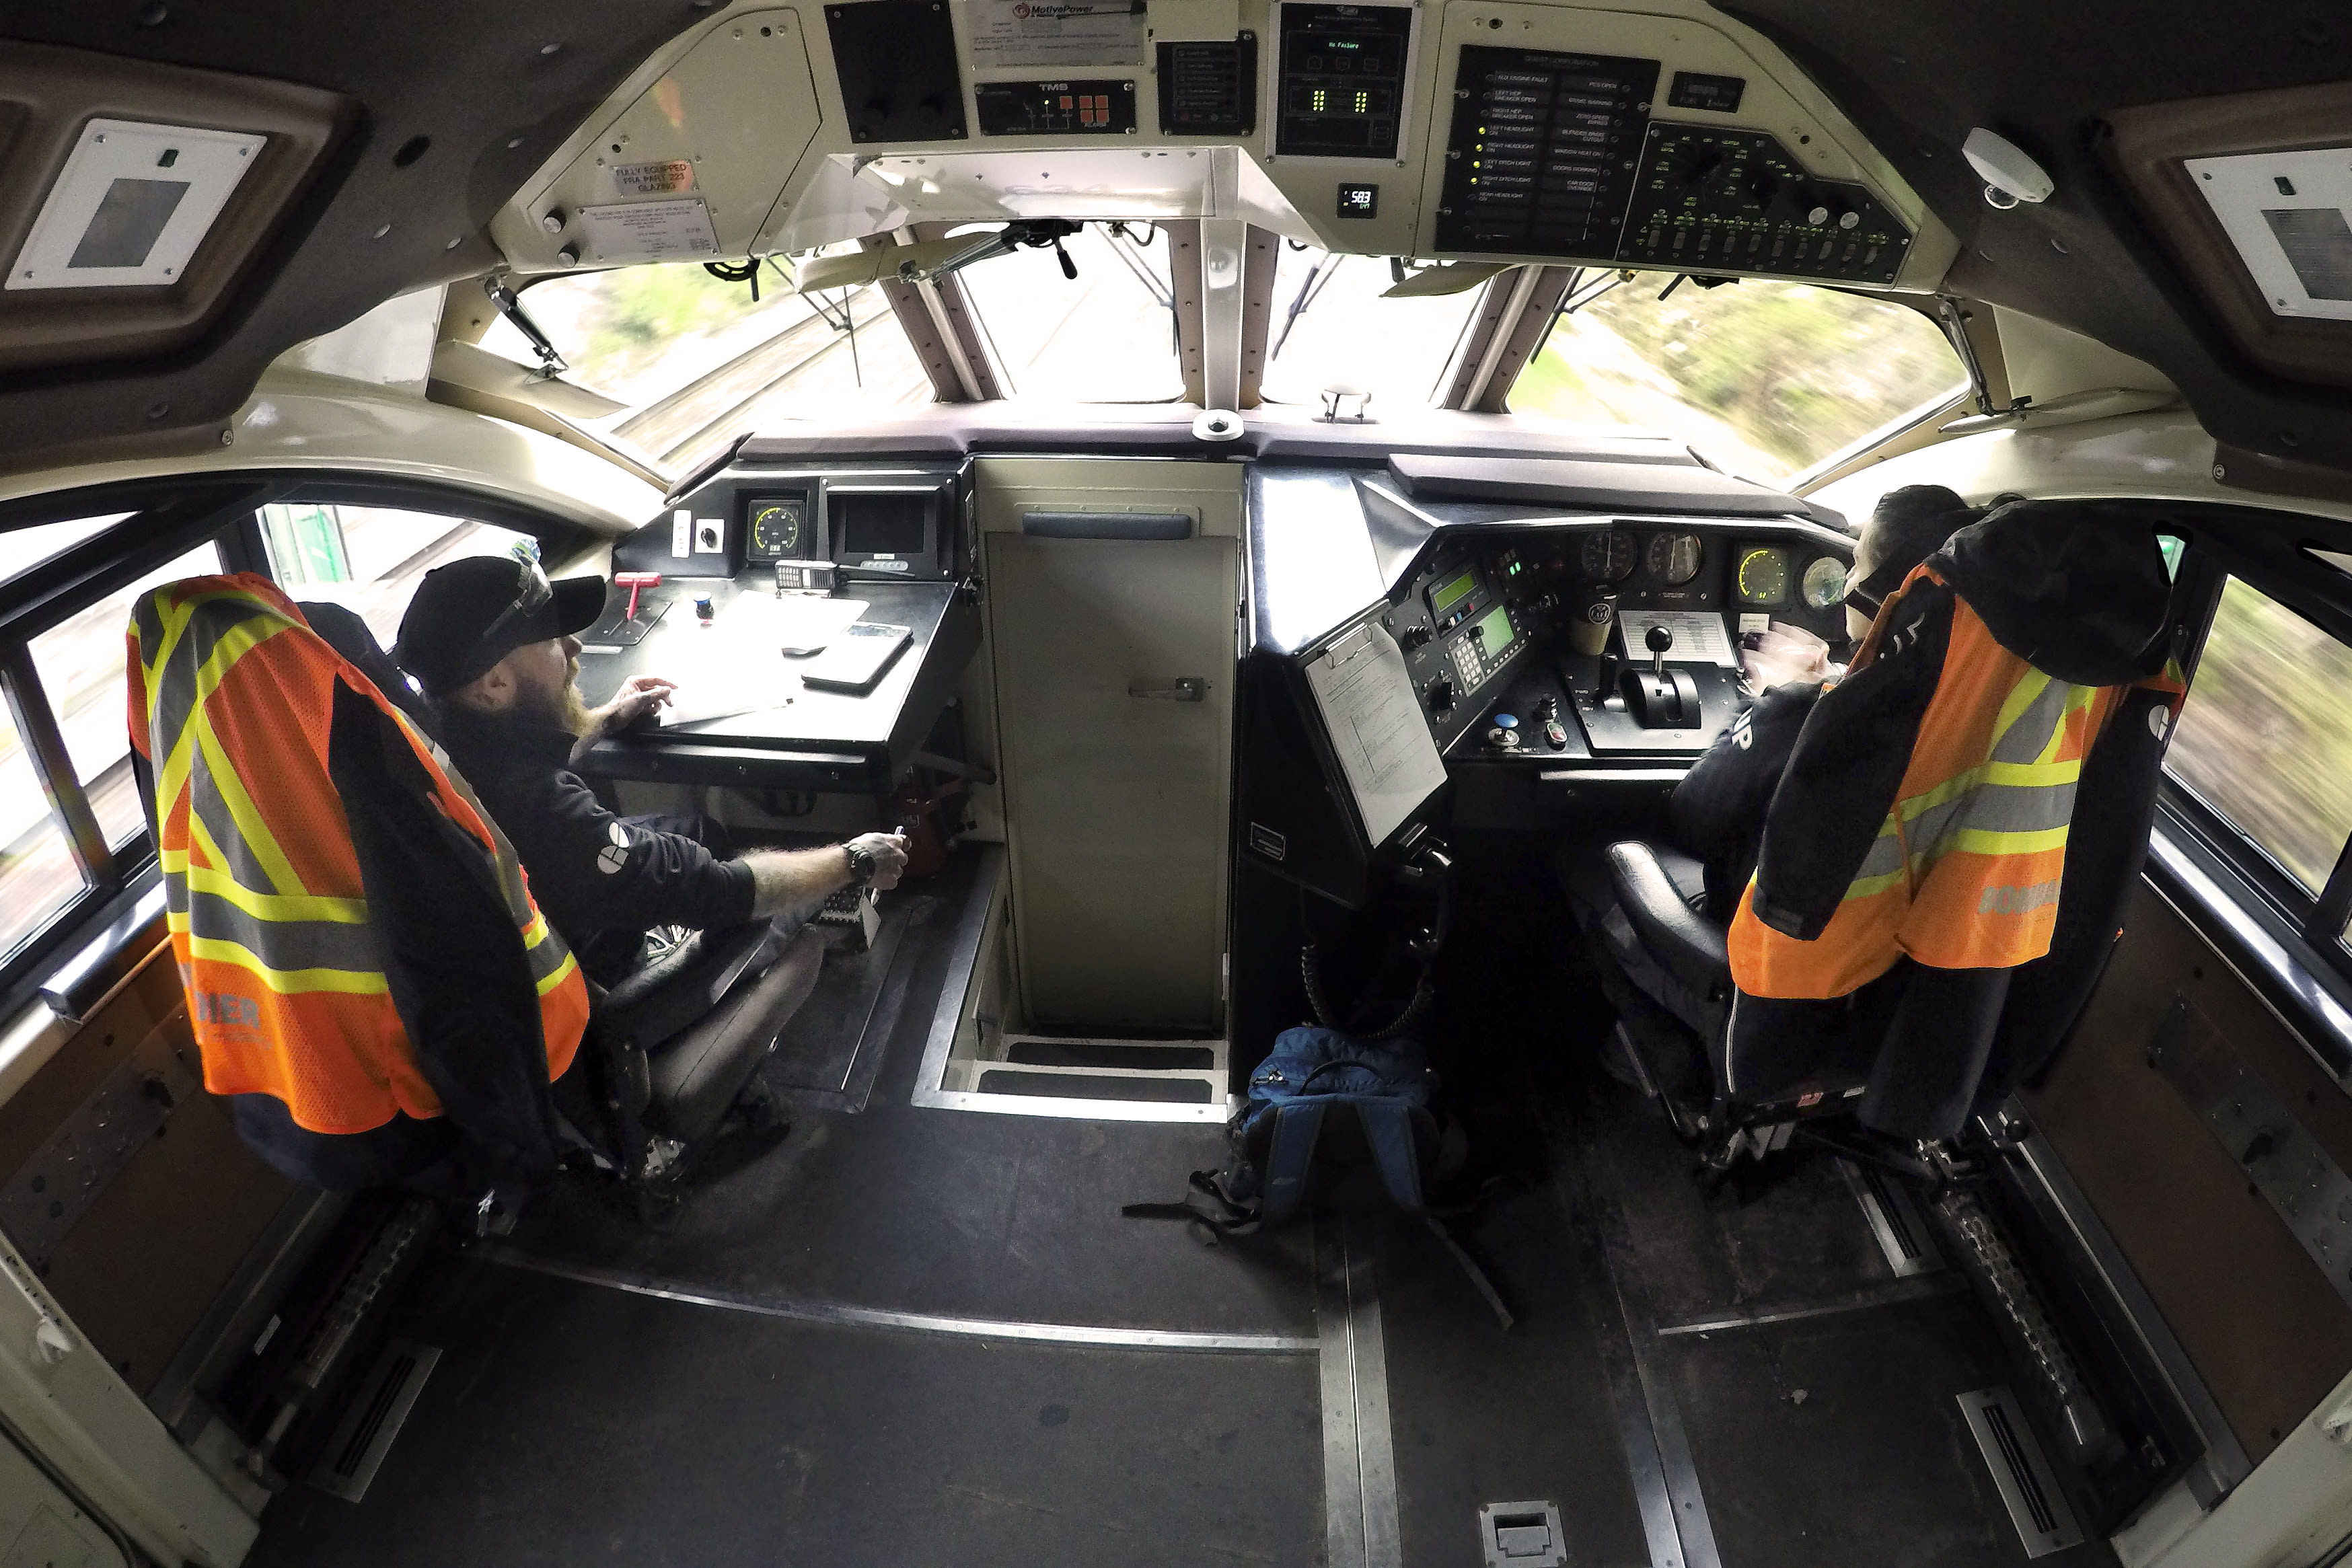 An inside view of the GO locomotive cab with two operators sitting in the chairs.